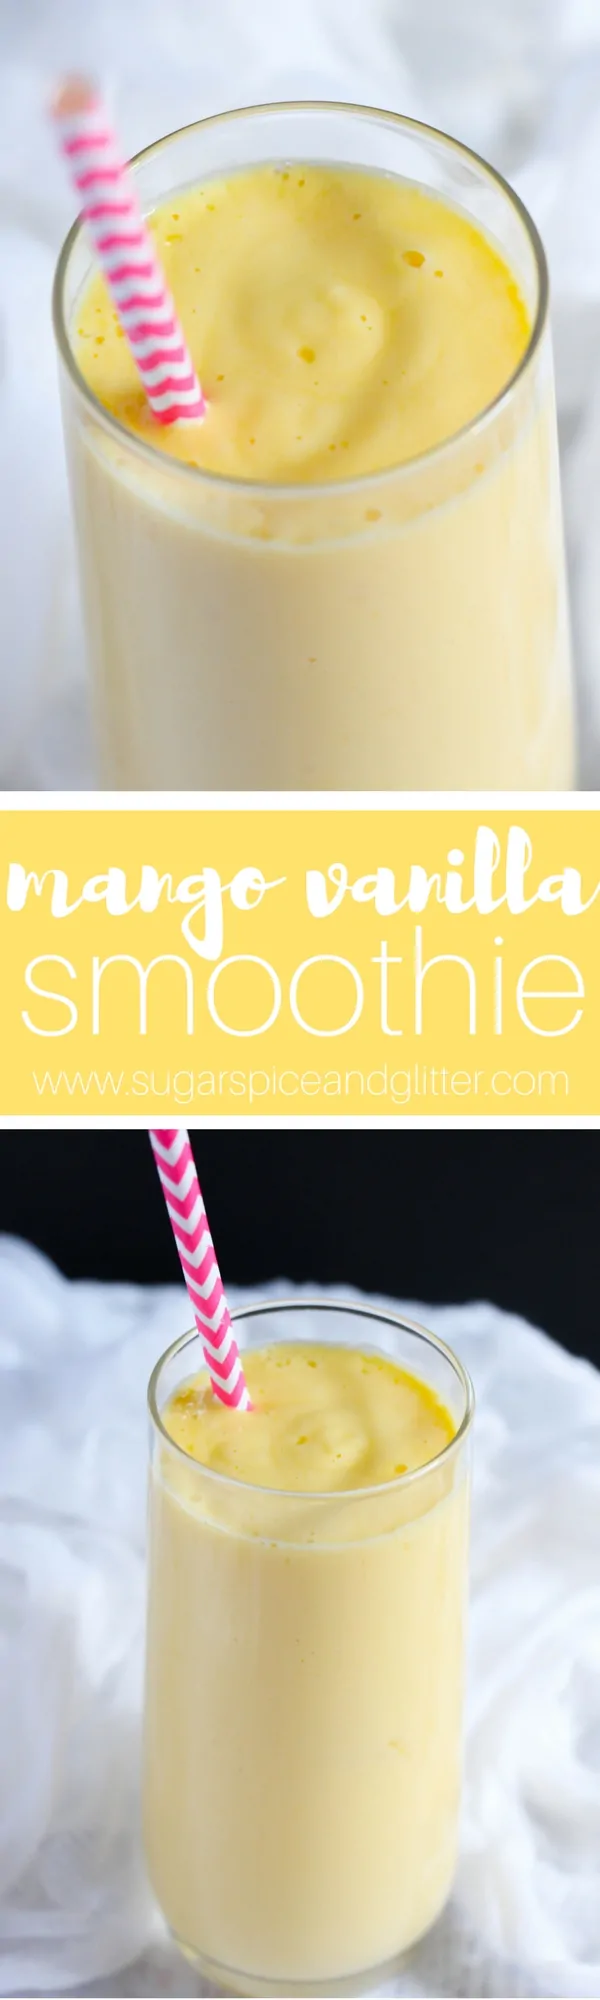 Mango Vanilla Smoothie, a creamy and smooth fruit smoothie perfect for brunch or an afternoon snack